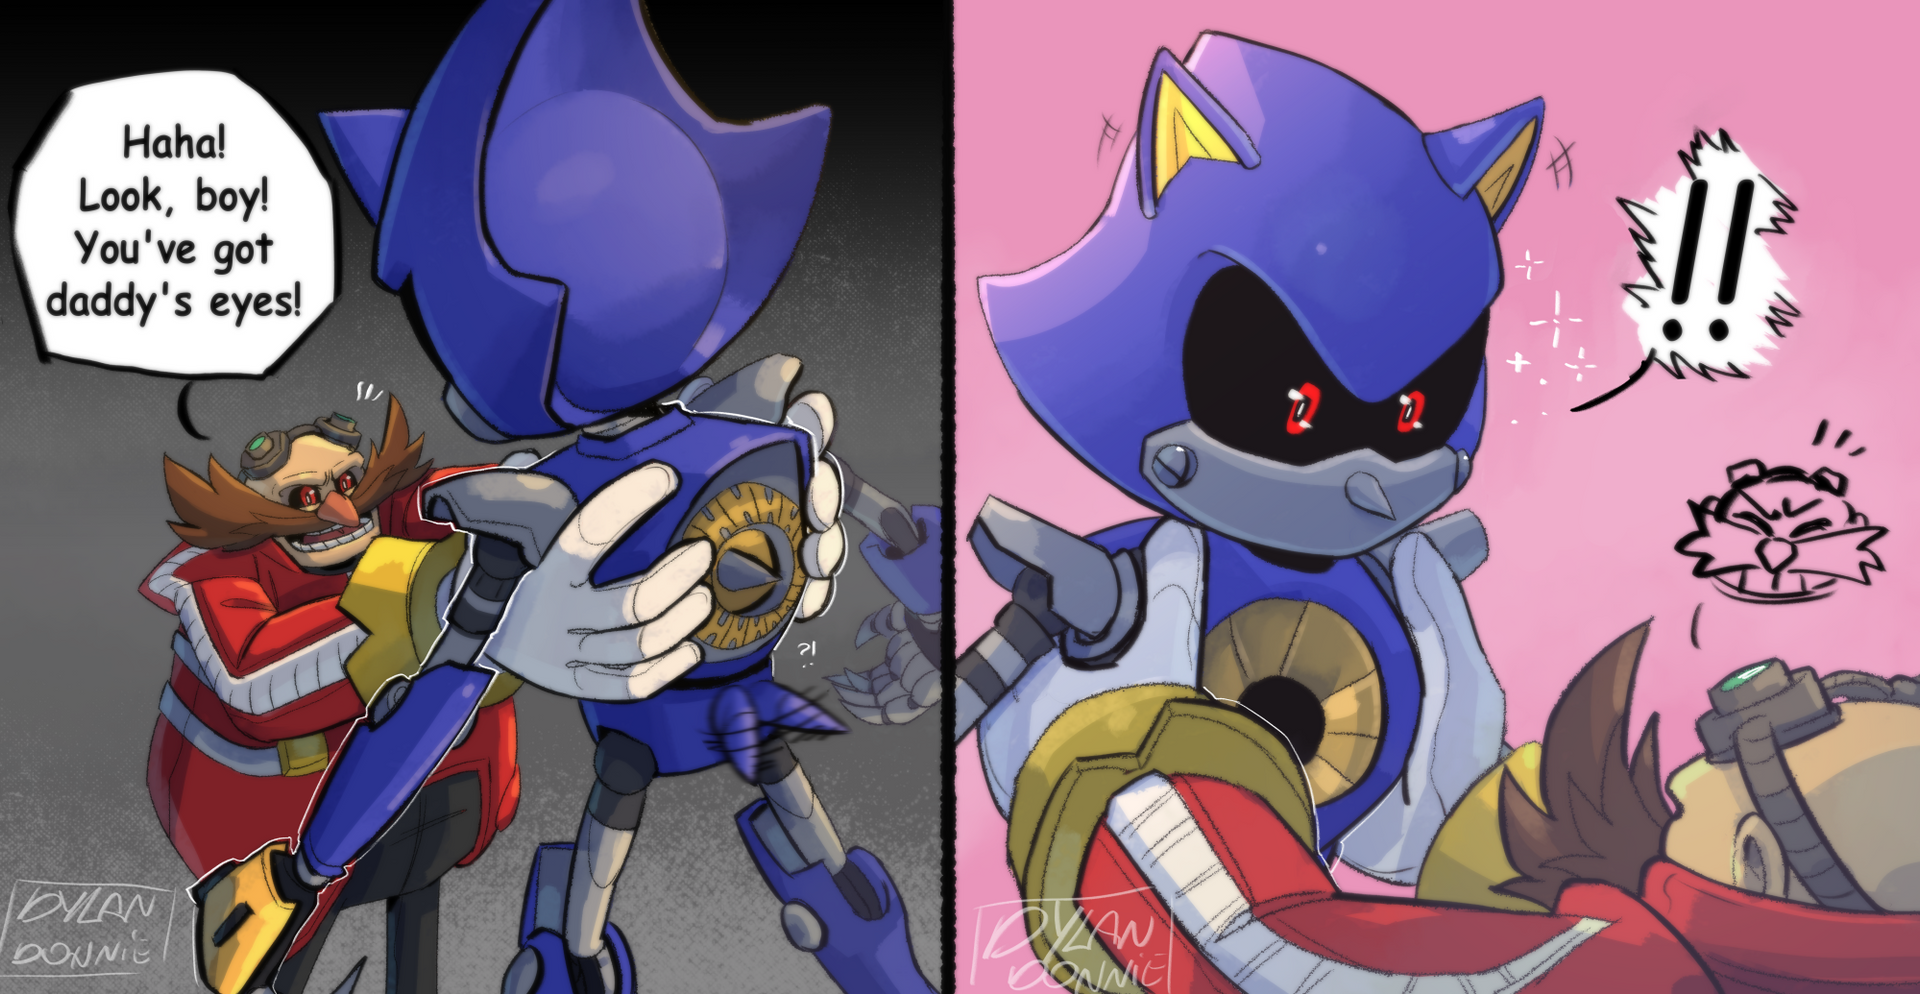 Neo Metal Sonic has always been my favorite character, so I wanted to have  a go at drawing him. Hope you like it! : r/SonicTheHedgehog